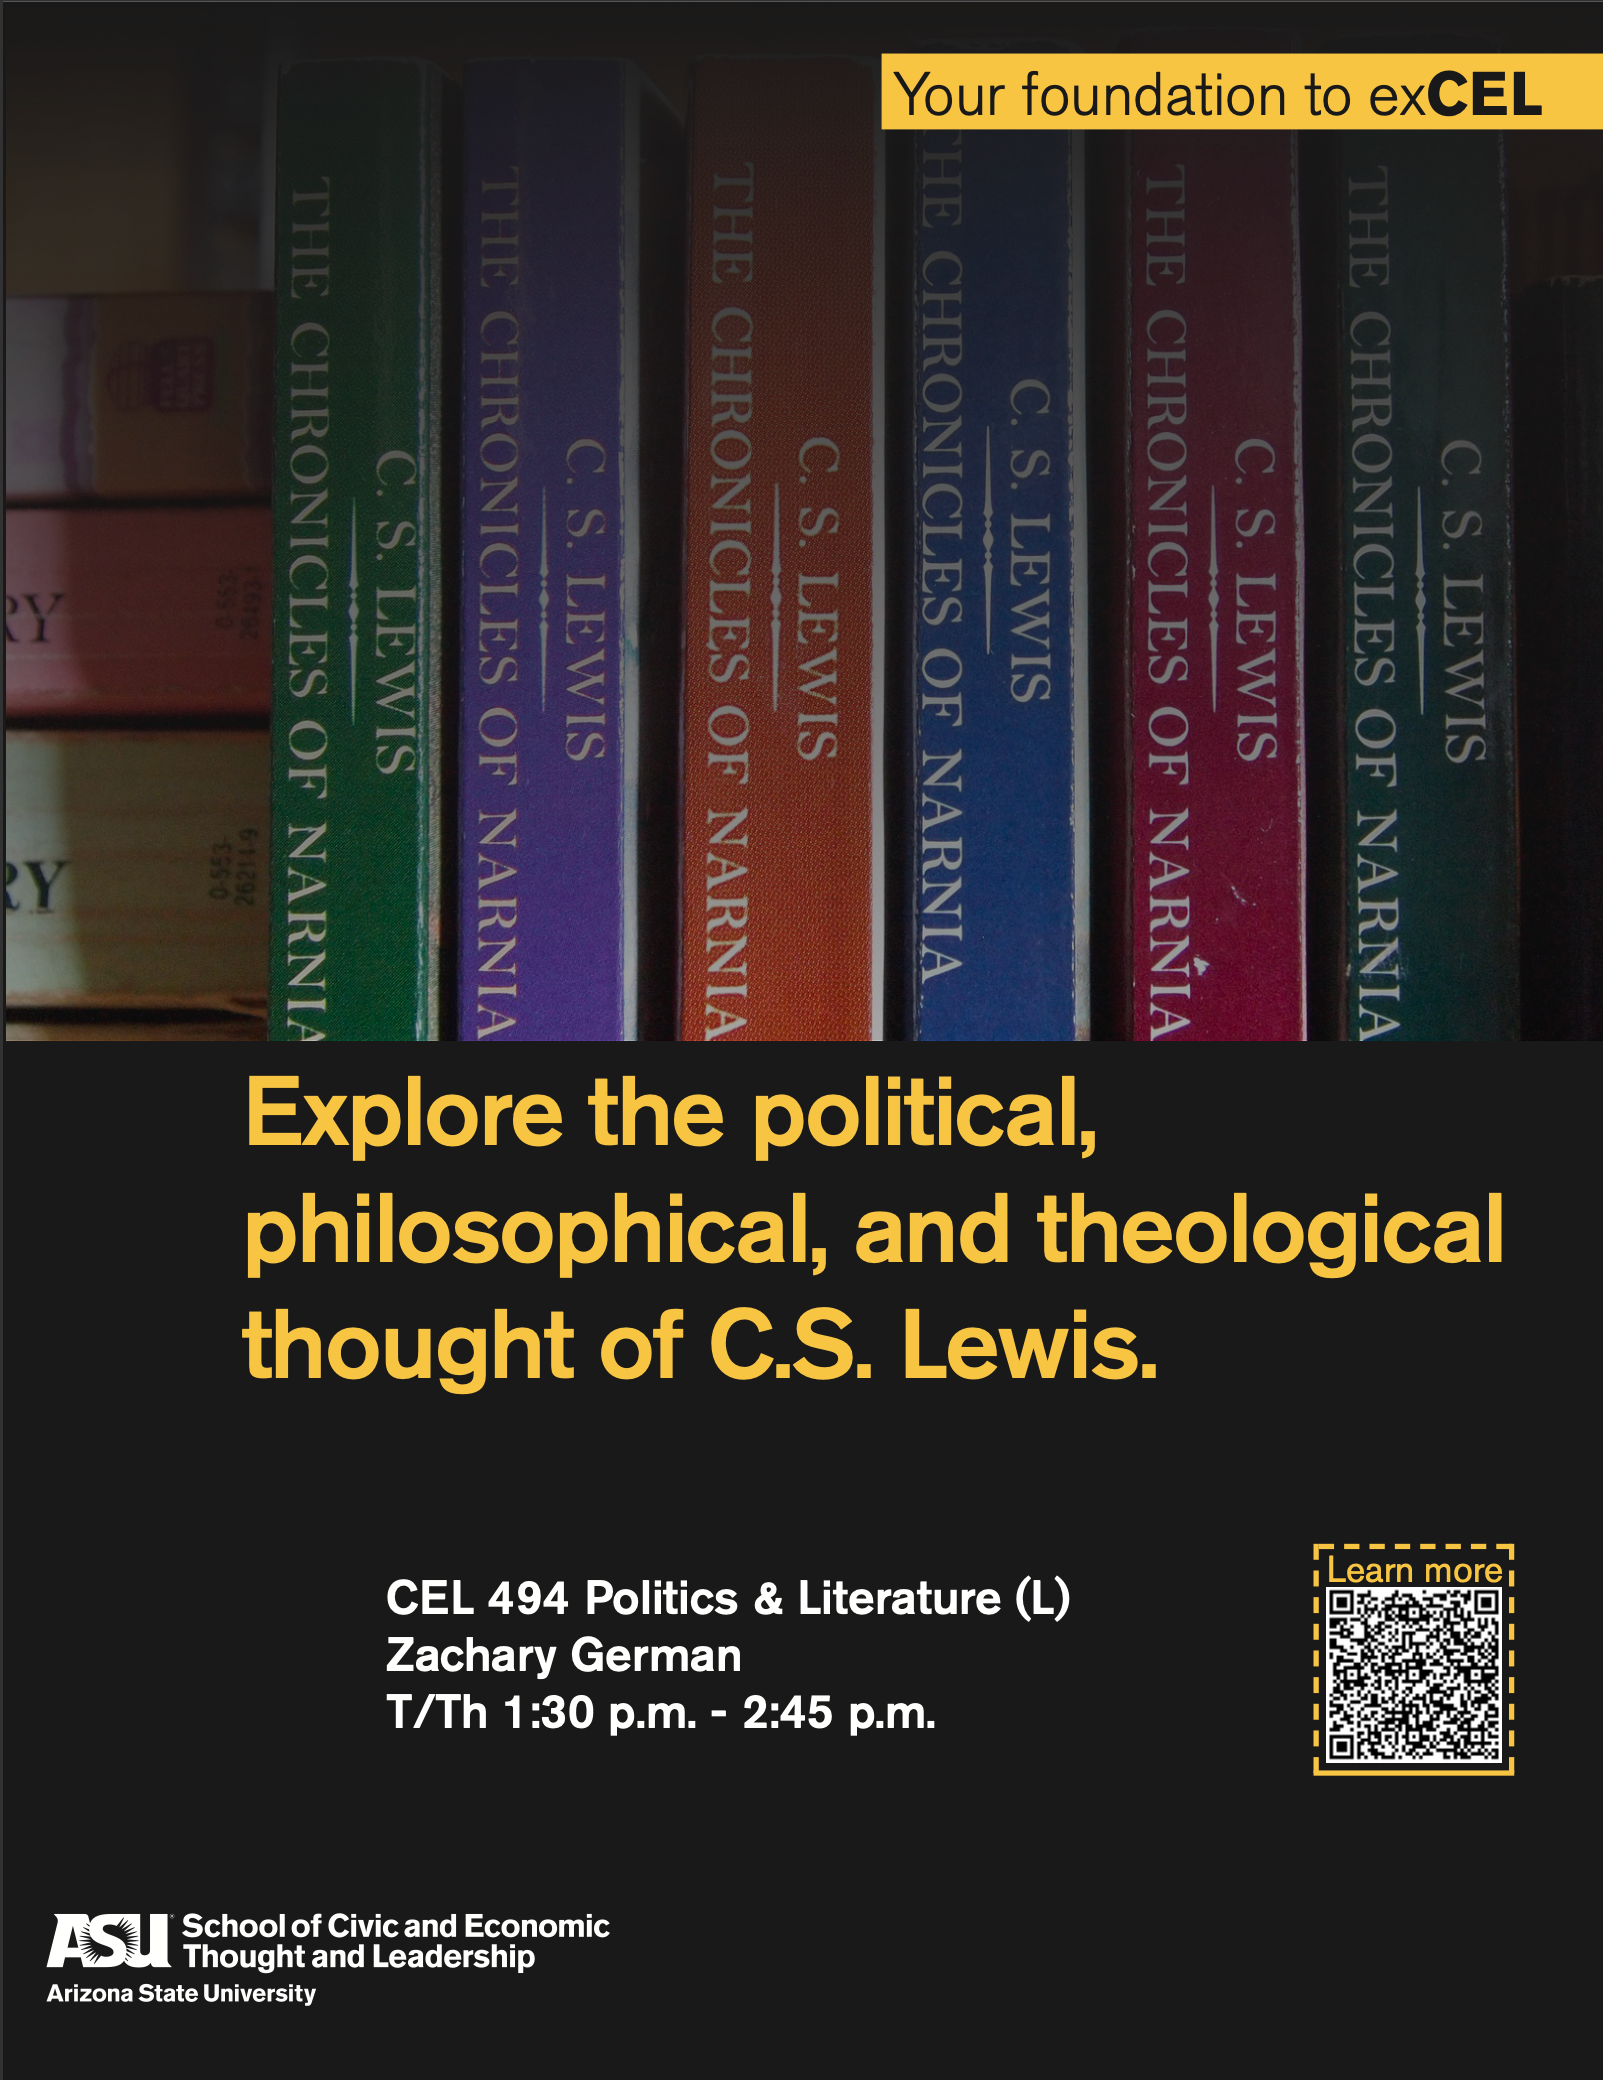 Promotional flyer for Professor German's course on C.S. Lewis